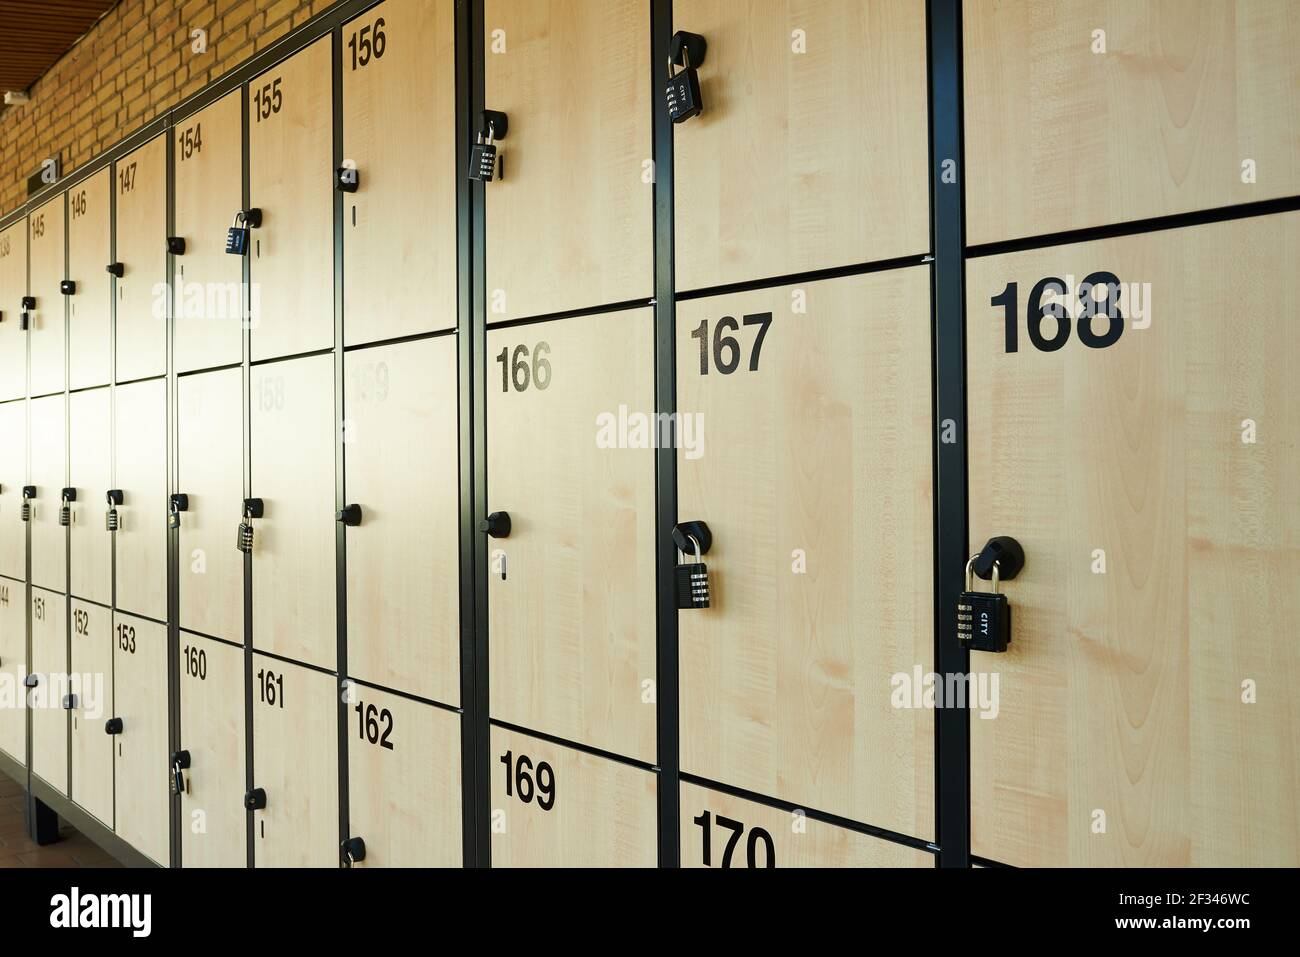 School lockers for students with numbers and safety locks Stock Photo